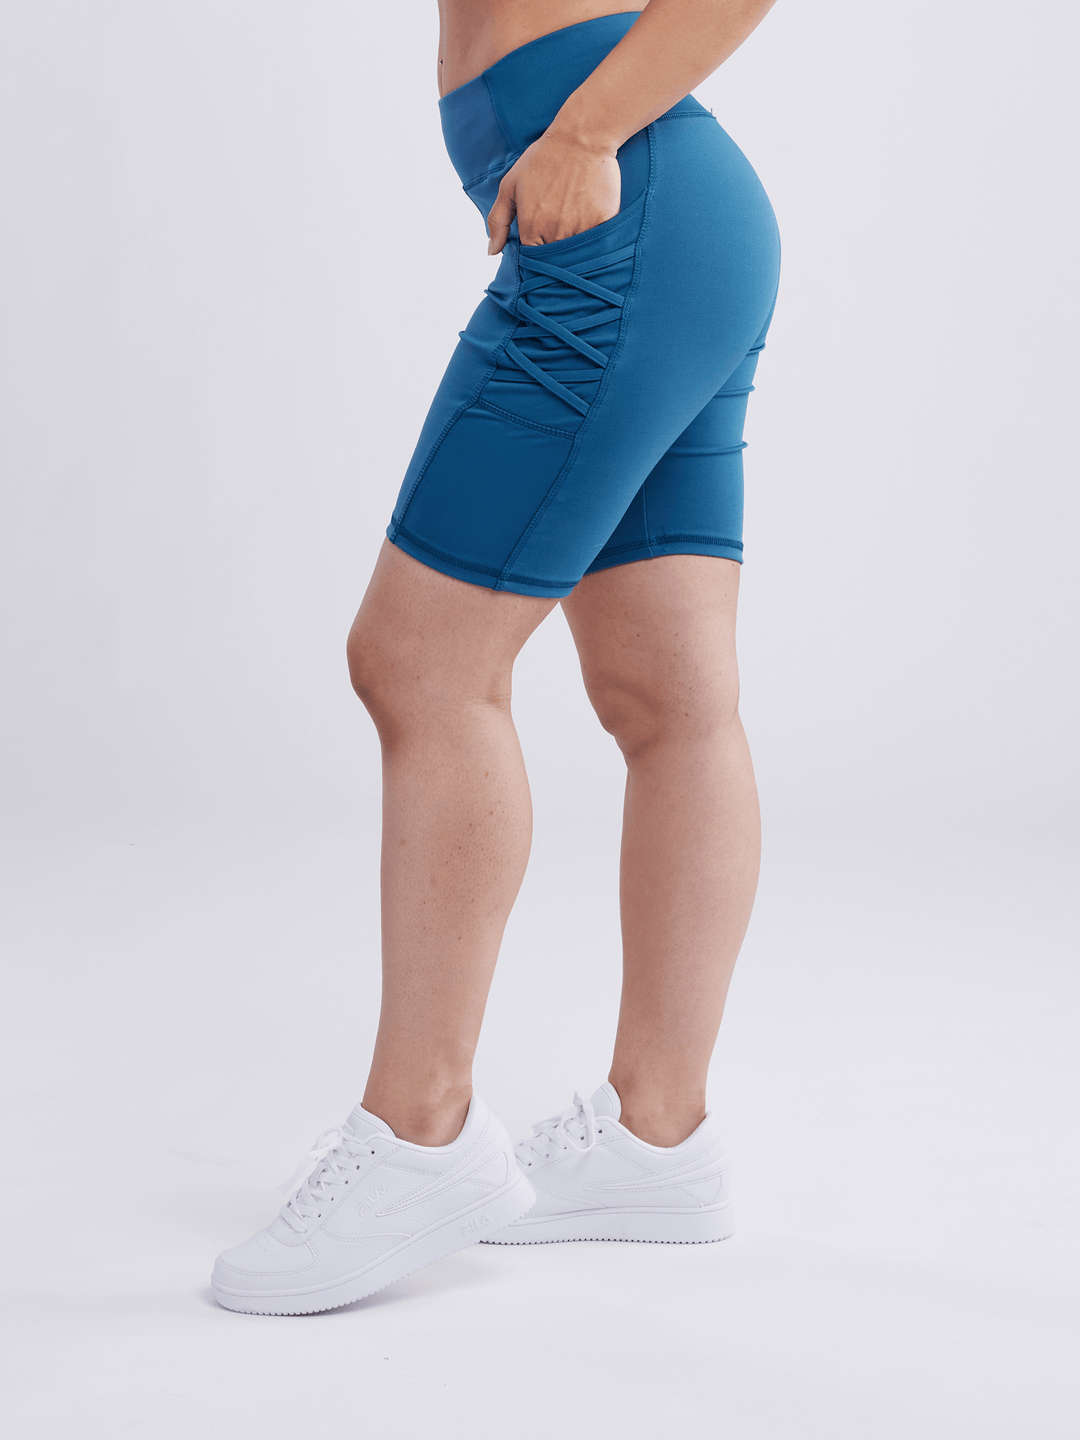 High-Waisted Workout Shorts with Pockets with Criss Cross Design